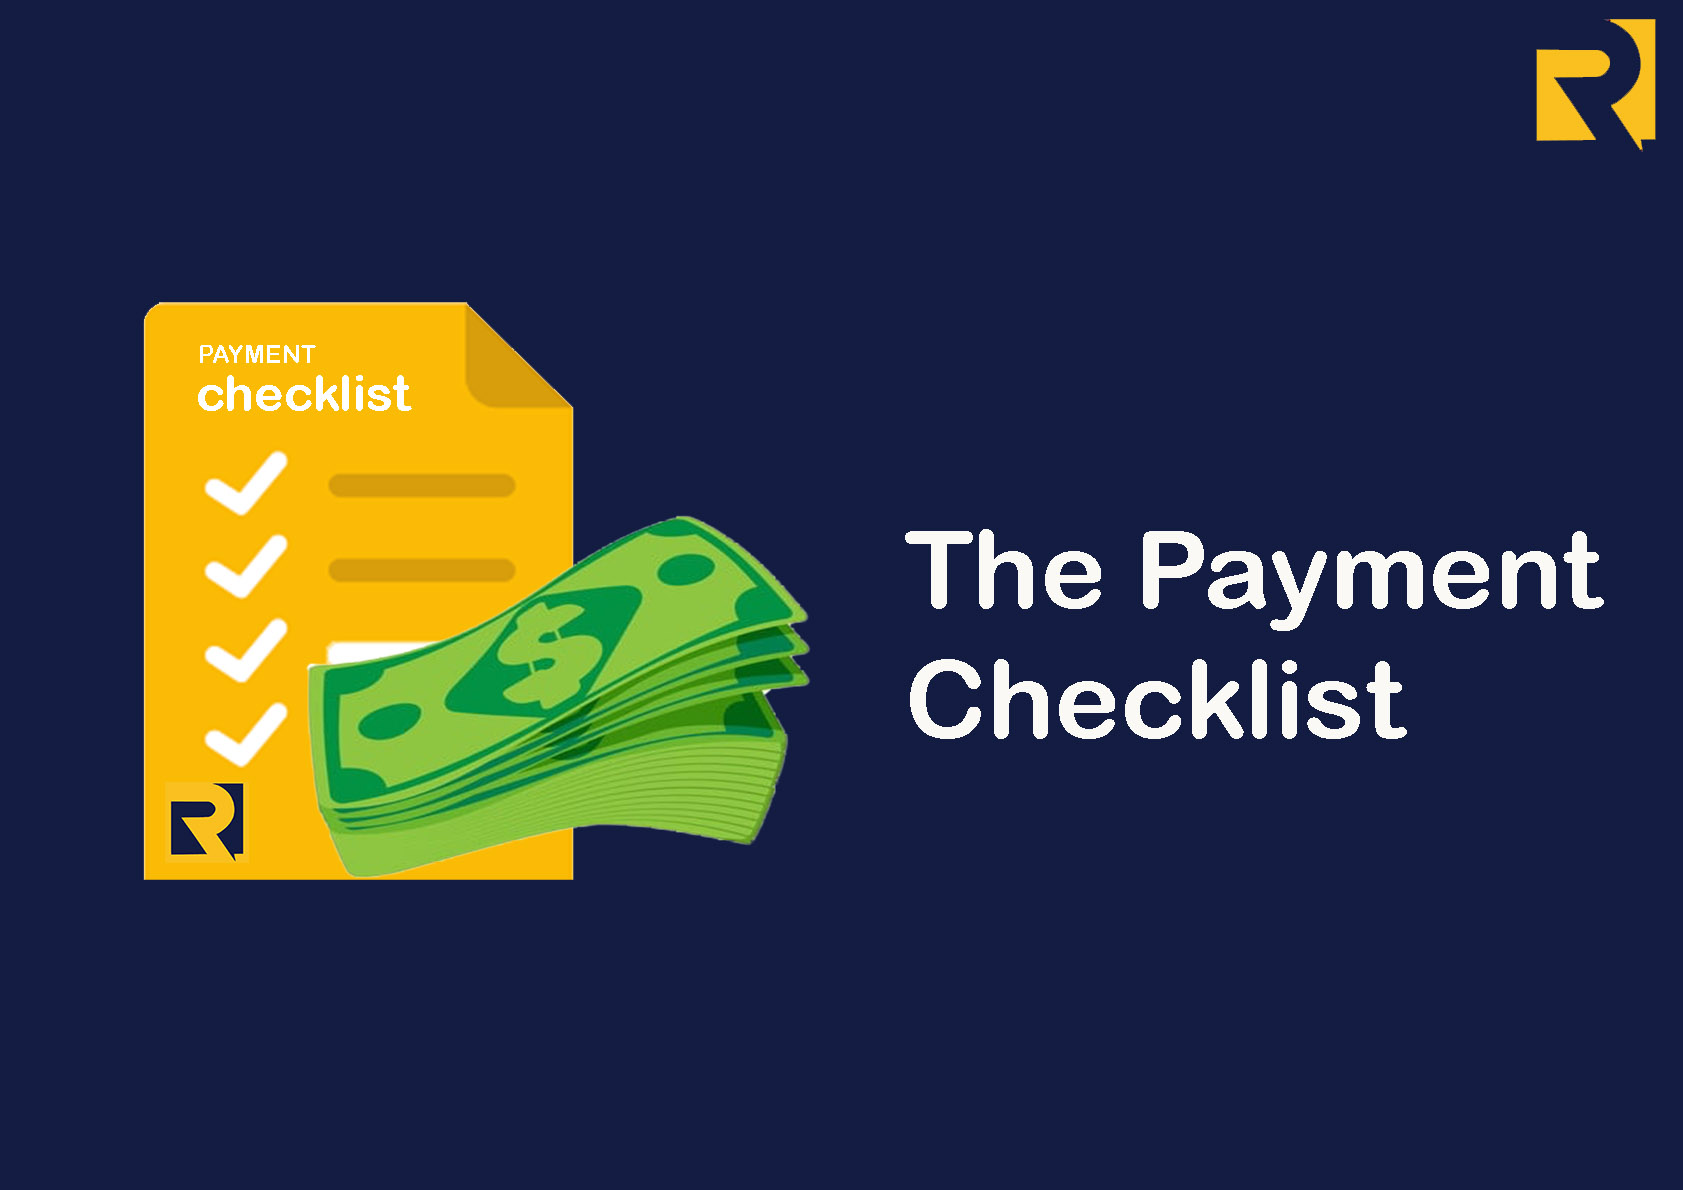 The Payment Checklist